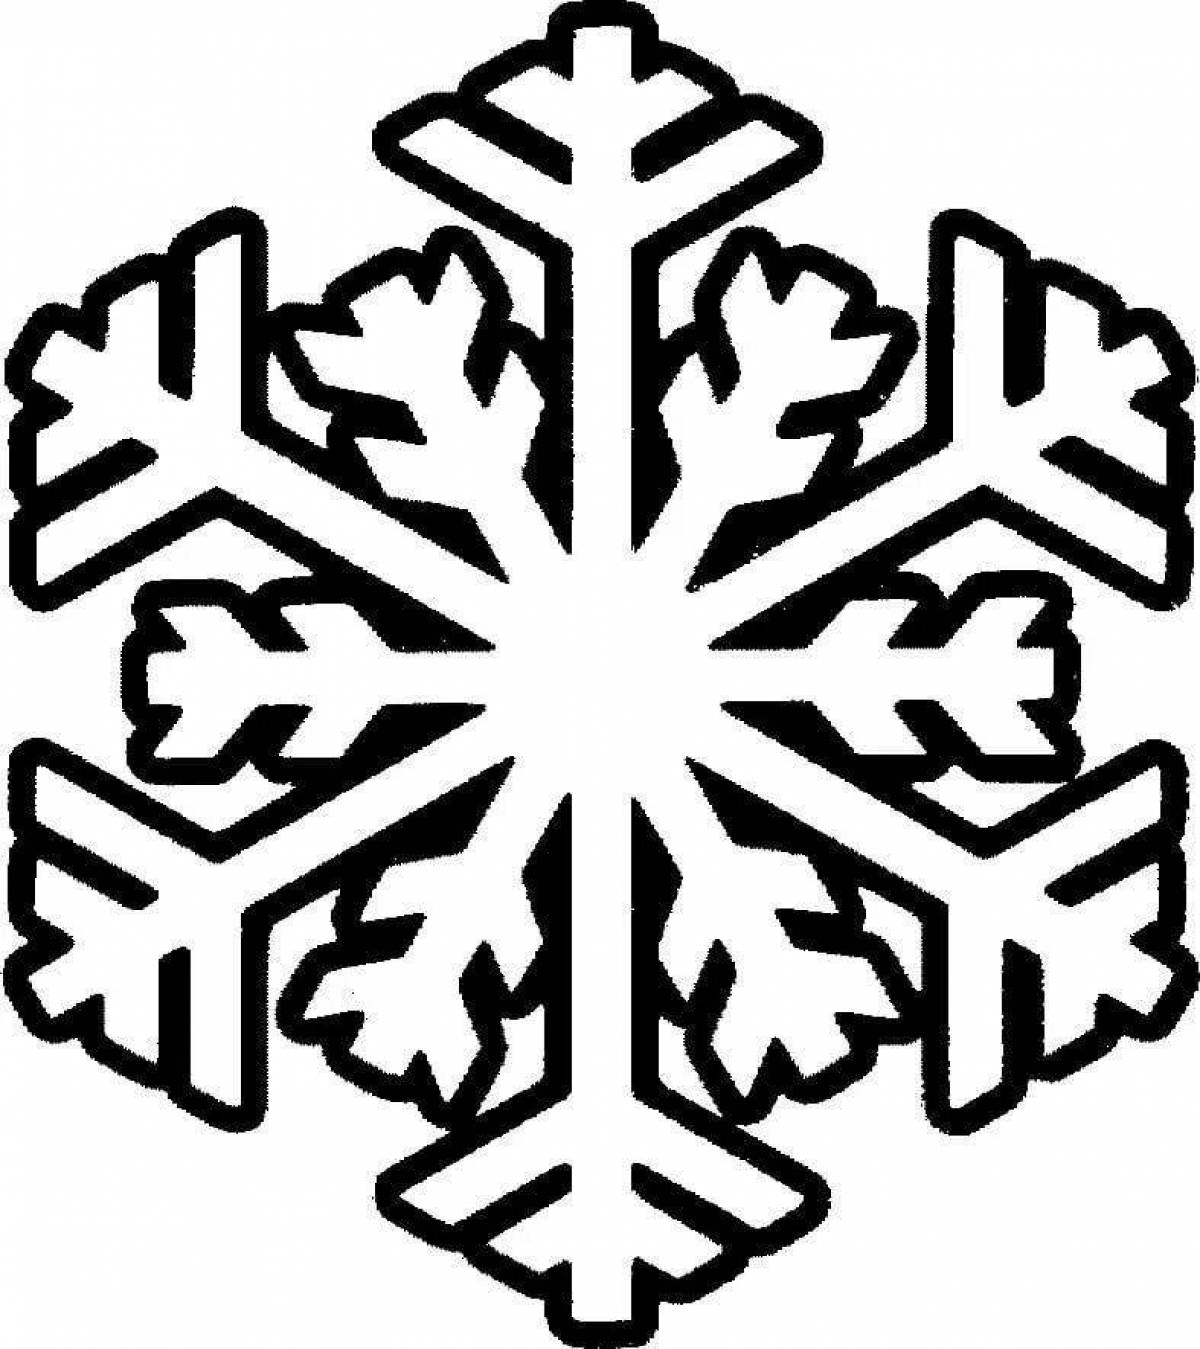 Adorable snowflake coloring book for kids